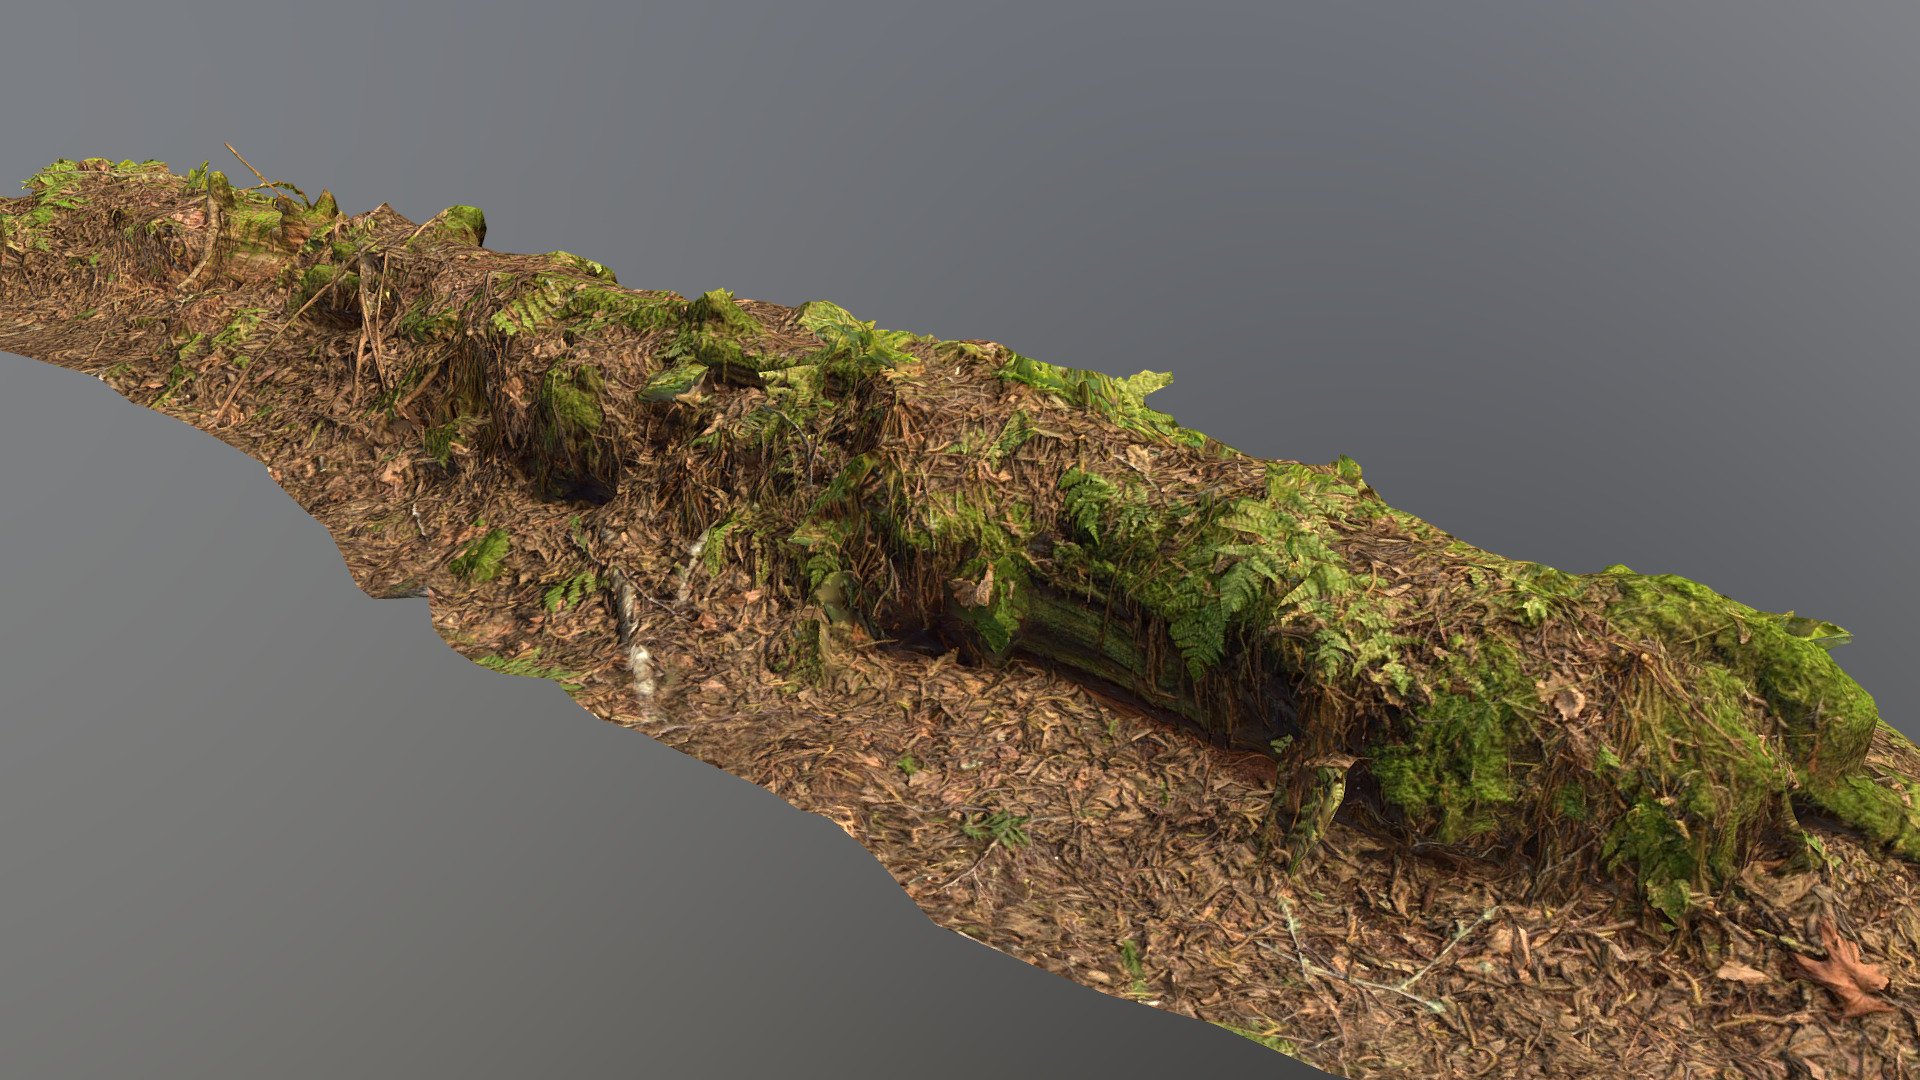 A fallen tree in the forest near Hansville. Captured with a Nikon 850 camera with wide angle. Low poly created in 3dMax using their new retopology tool. Maps baked out in Substance Designer. Touchted up on Substance Painter, Delit in Agisoft De-Lighter 3d model